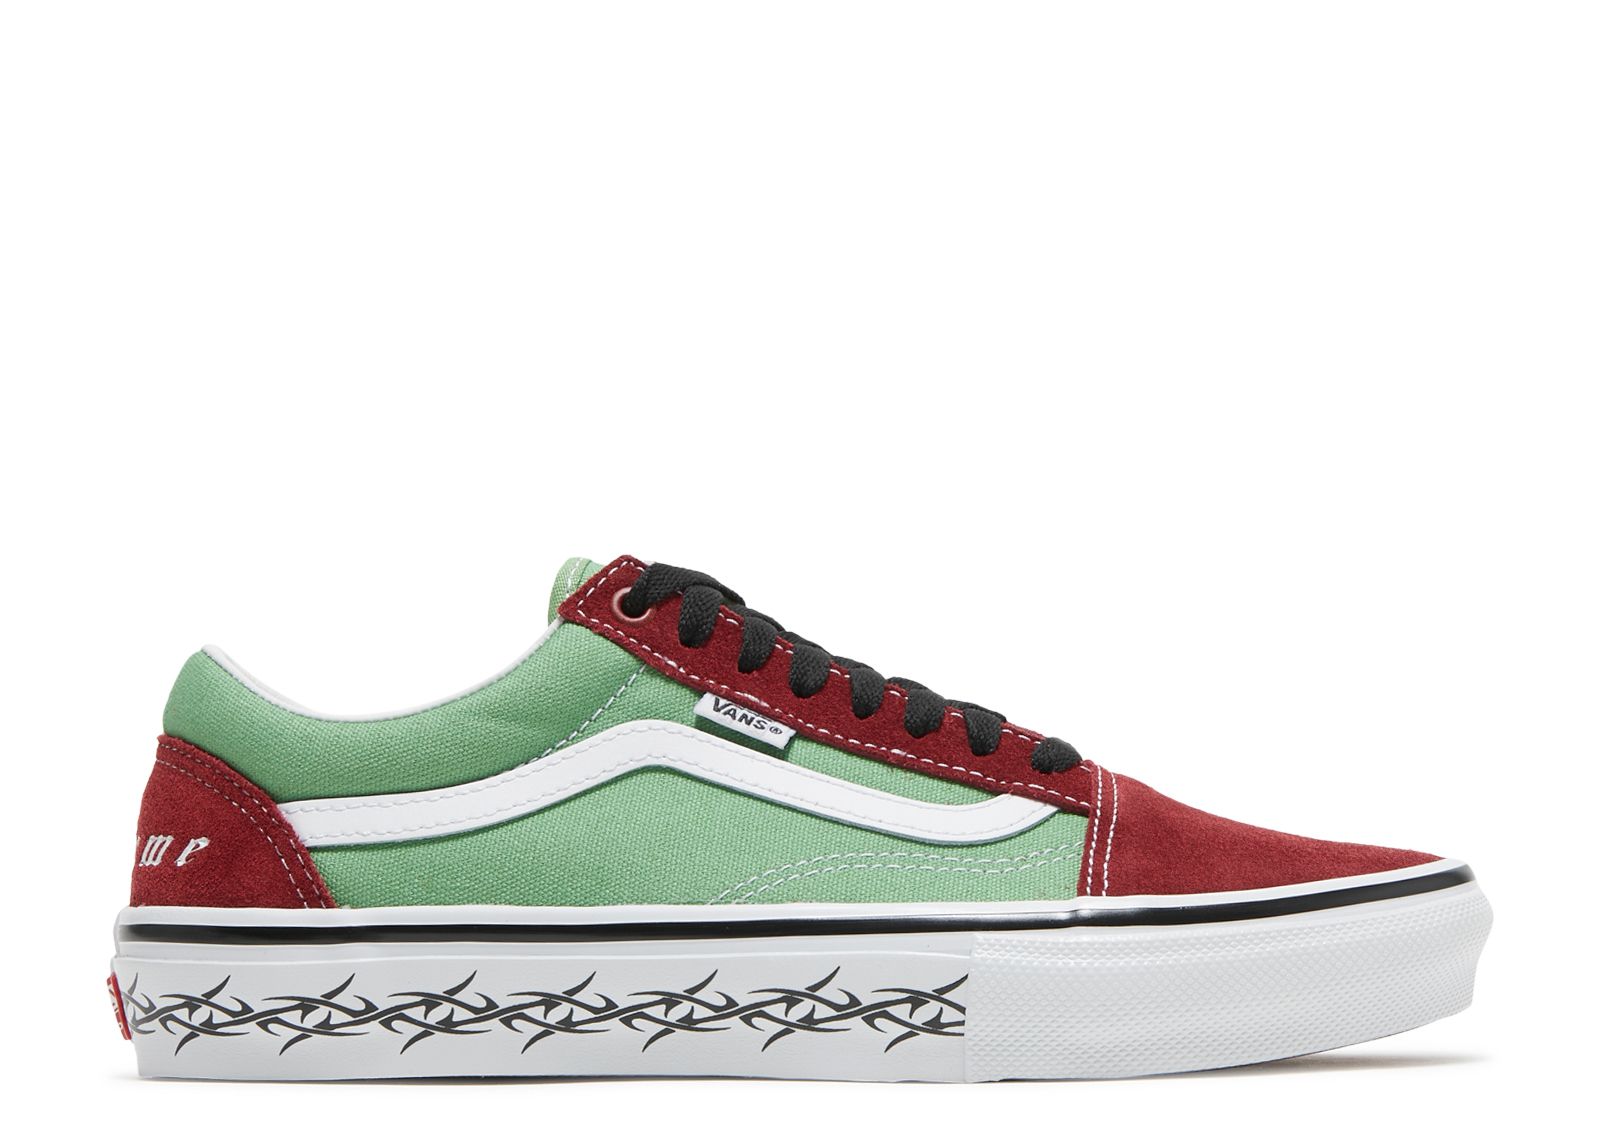 Кроссовки Vans Supreme X Old Skool 'Barbed Wire - Green', зеленый ce cog 4d barbed suture with l cannula 21g 100mm wire fact lift hilos tensores hskinlift pdo molding fishbone mono thread